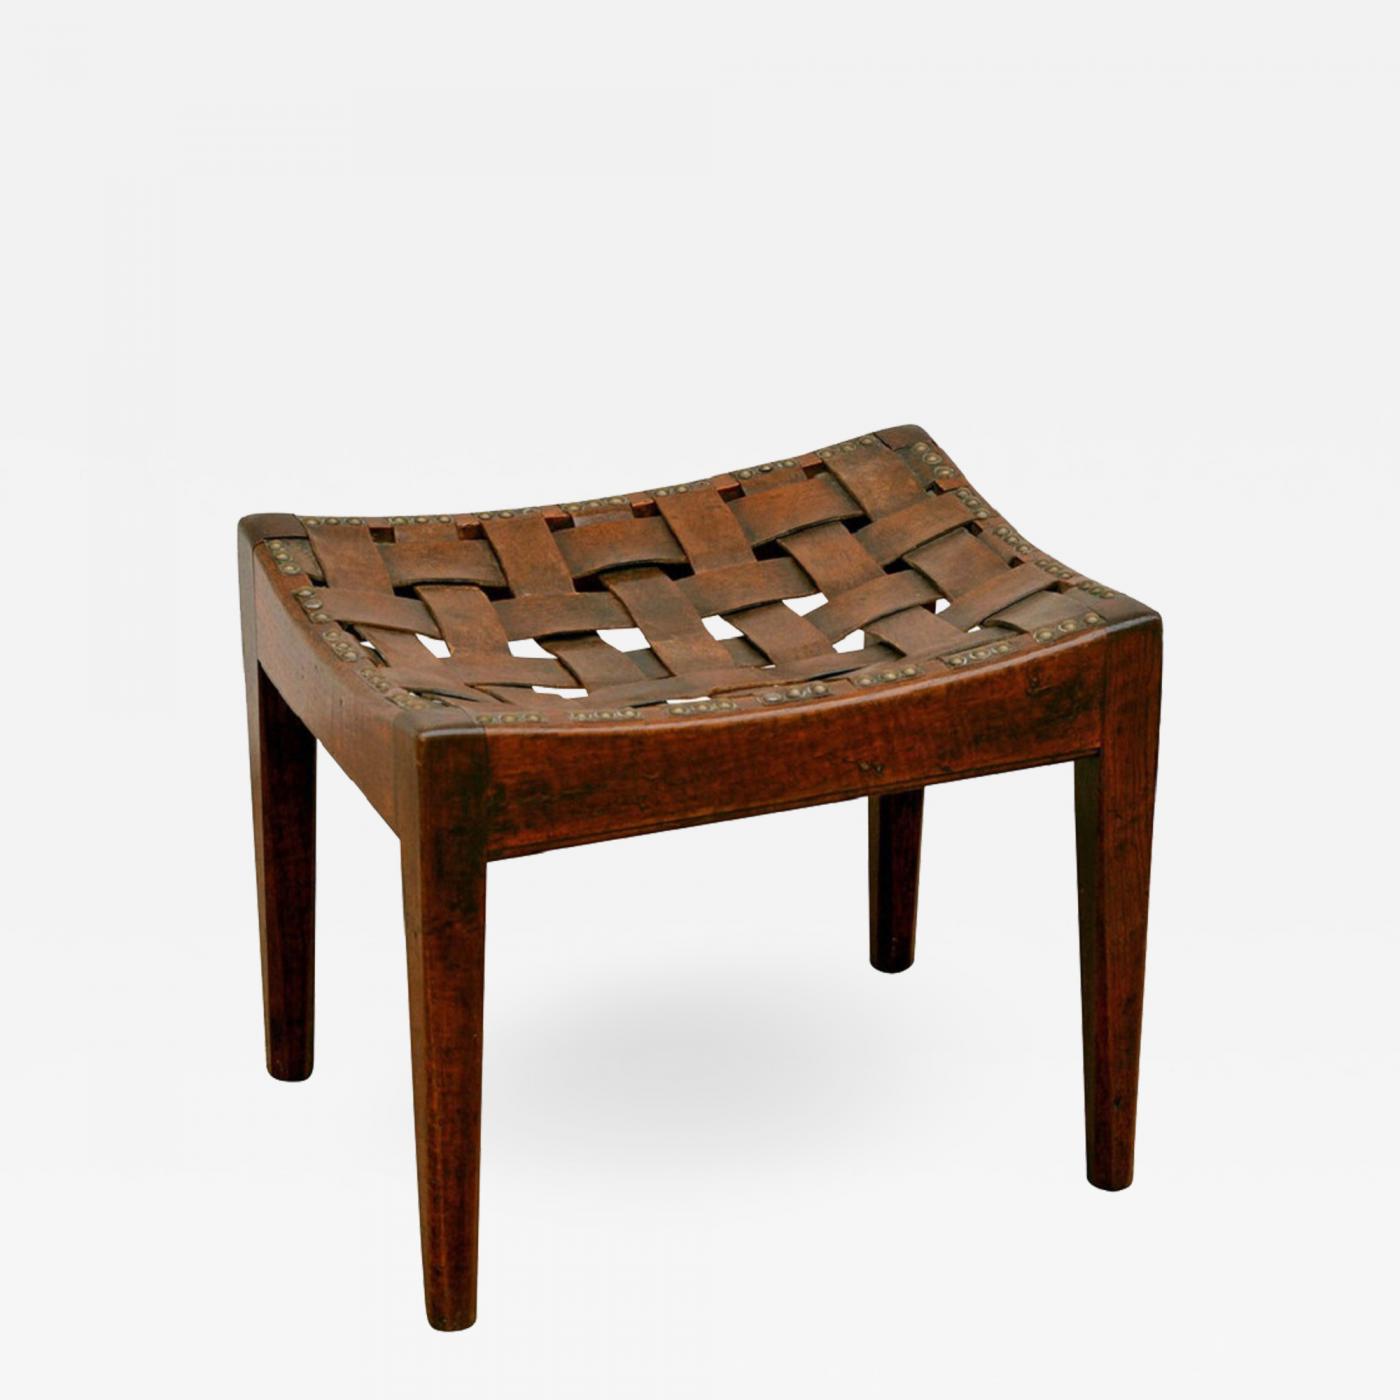 Arthur Simpson English Arts And Crafts Polished Oak And Leather Stool By Arthur Simpson